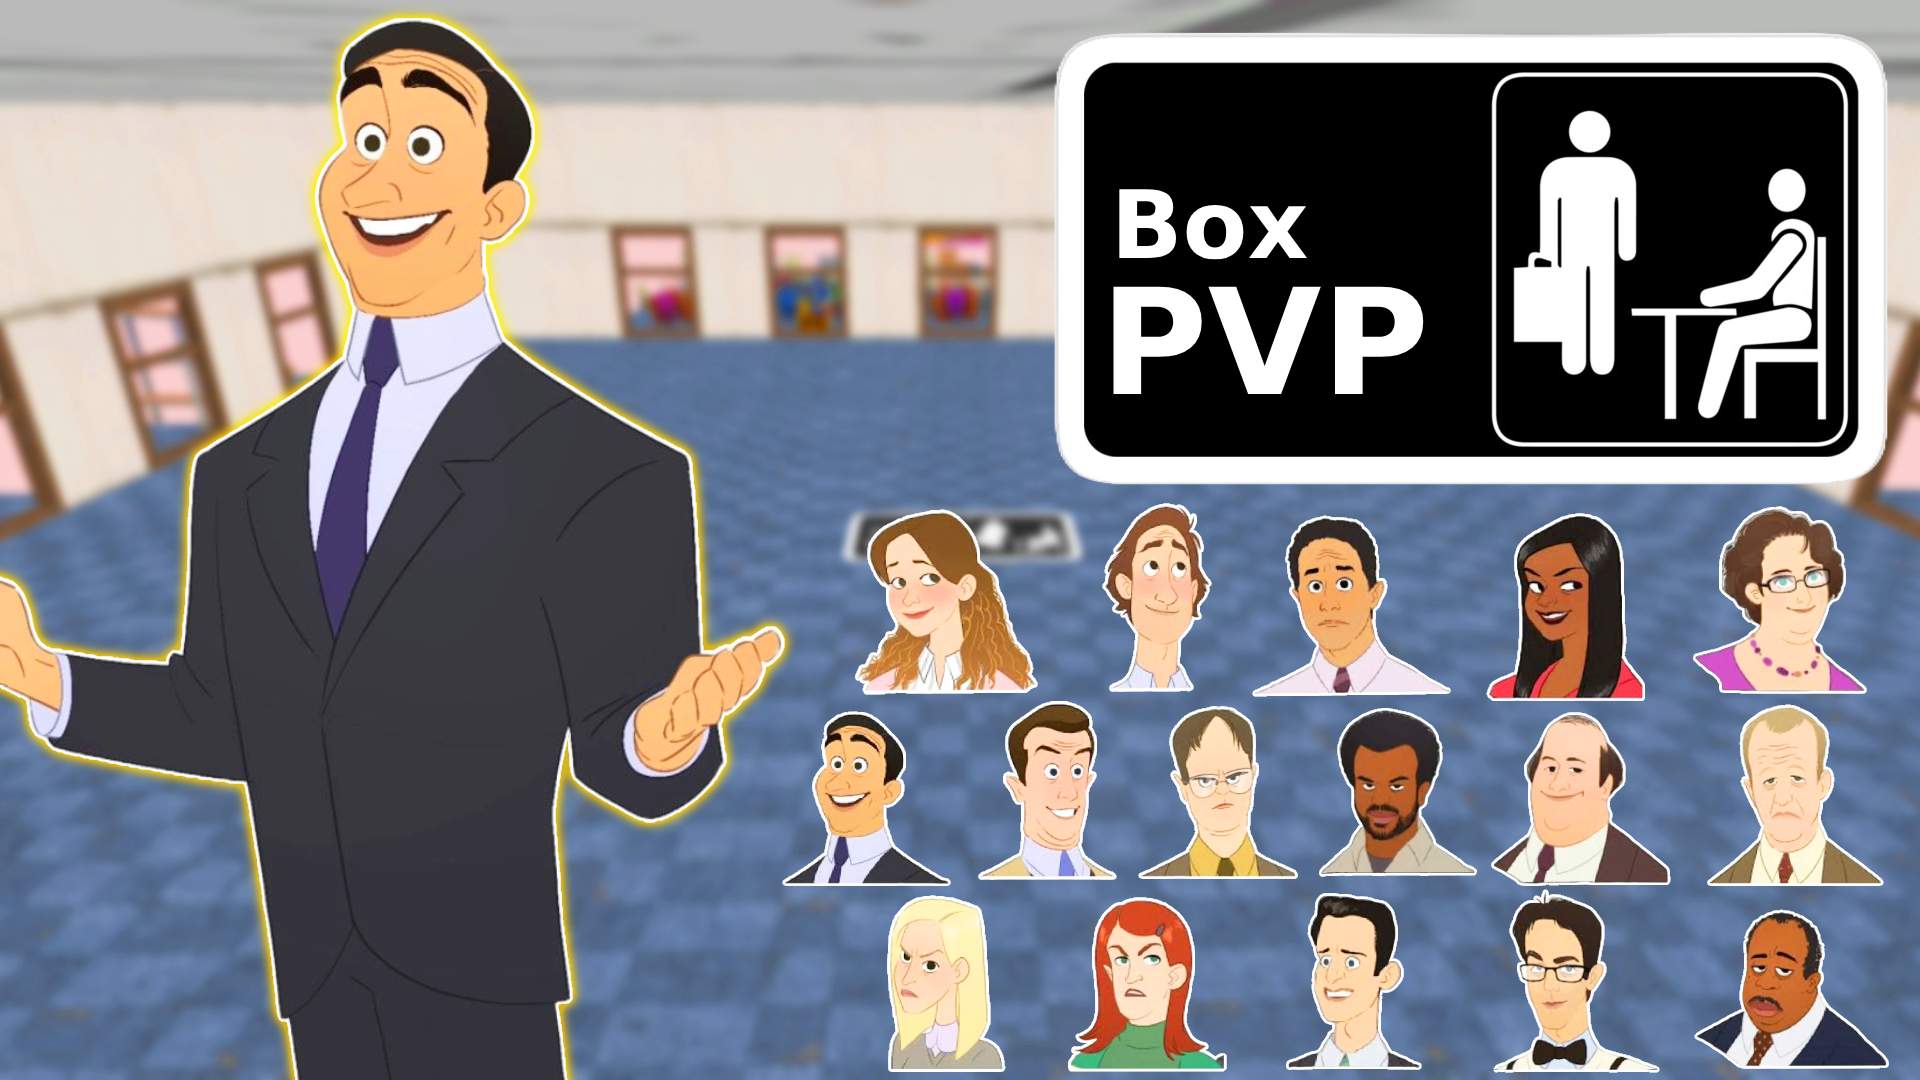 🏢The Office Box PVP📦